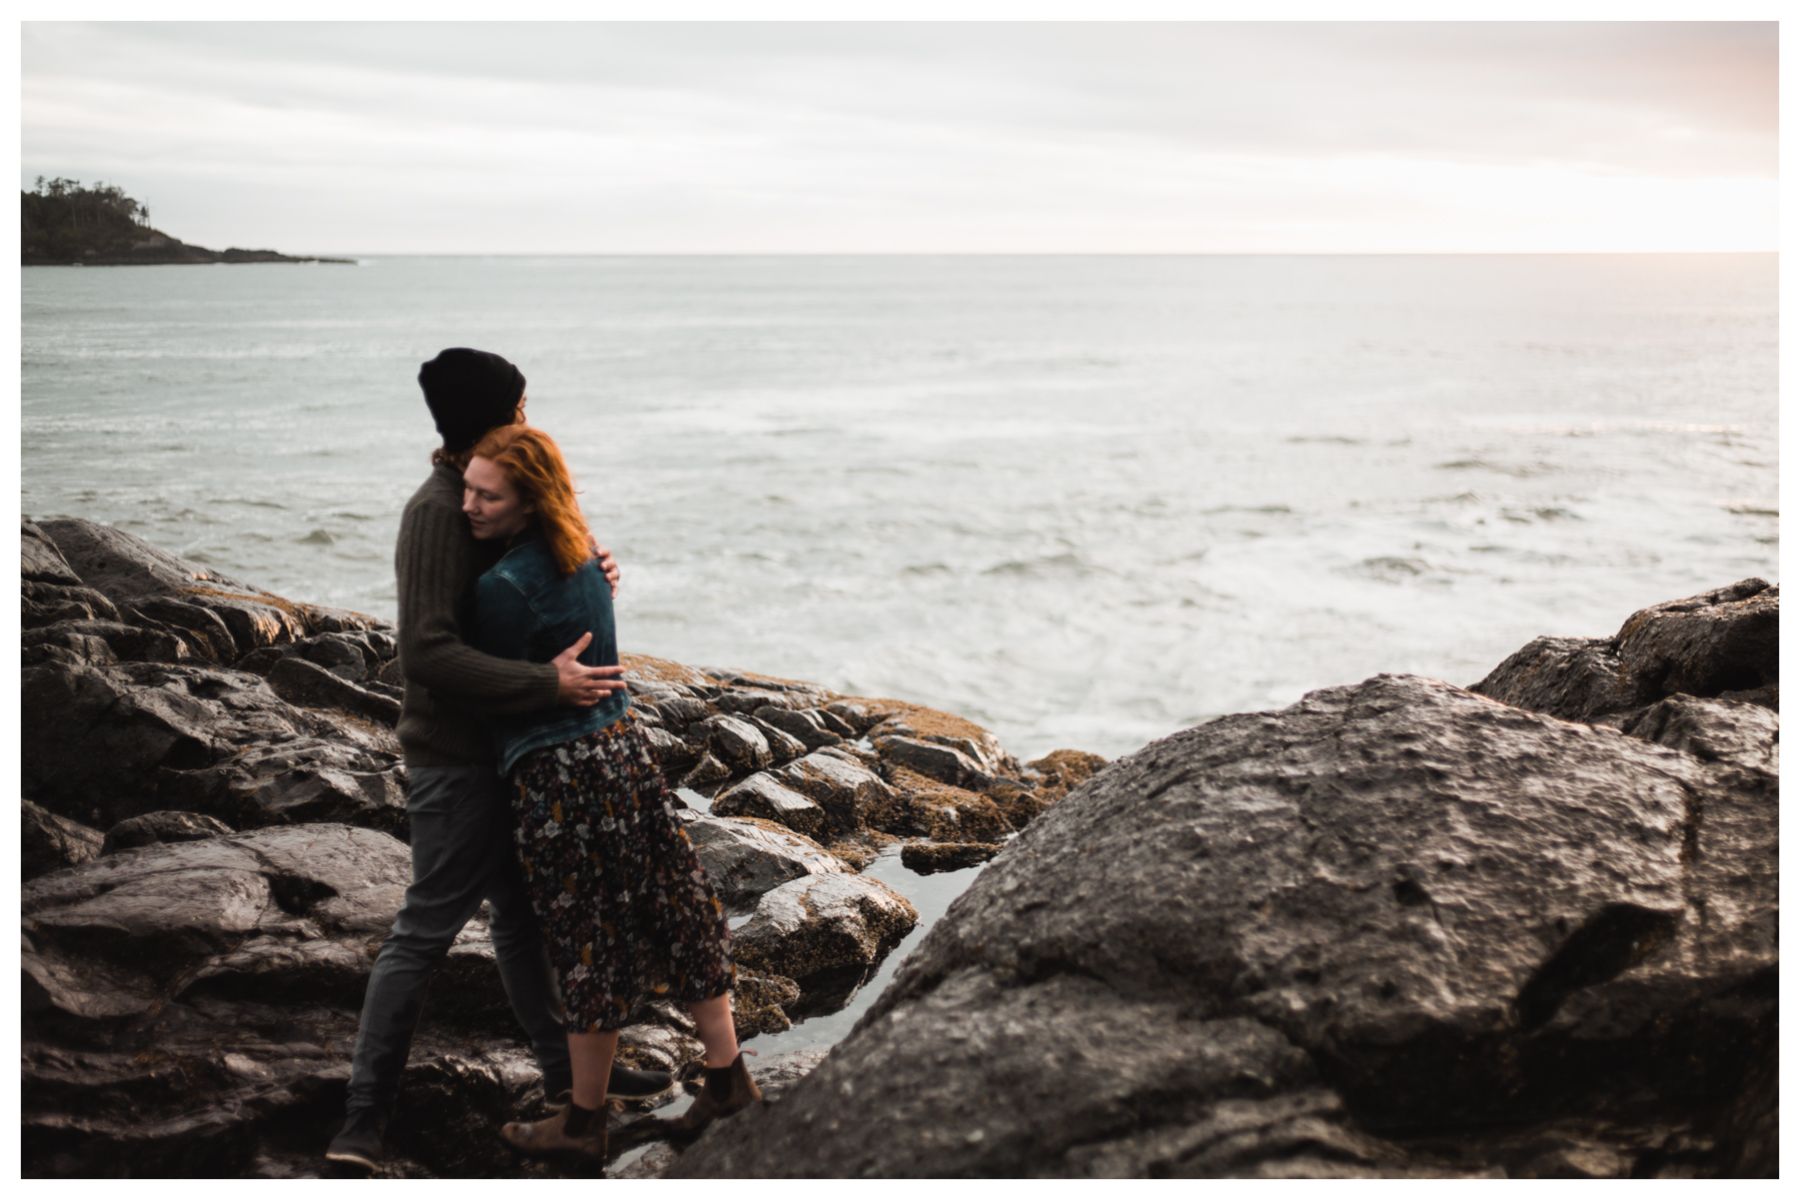 Tofino wedding photographer for a destination engagement photography session on Vancouver Island, BC - Image 15